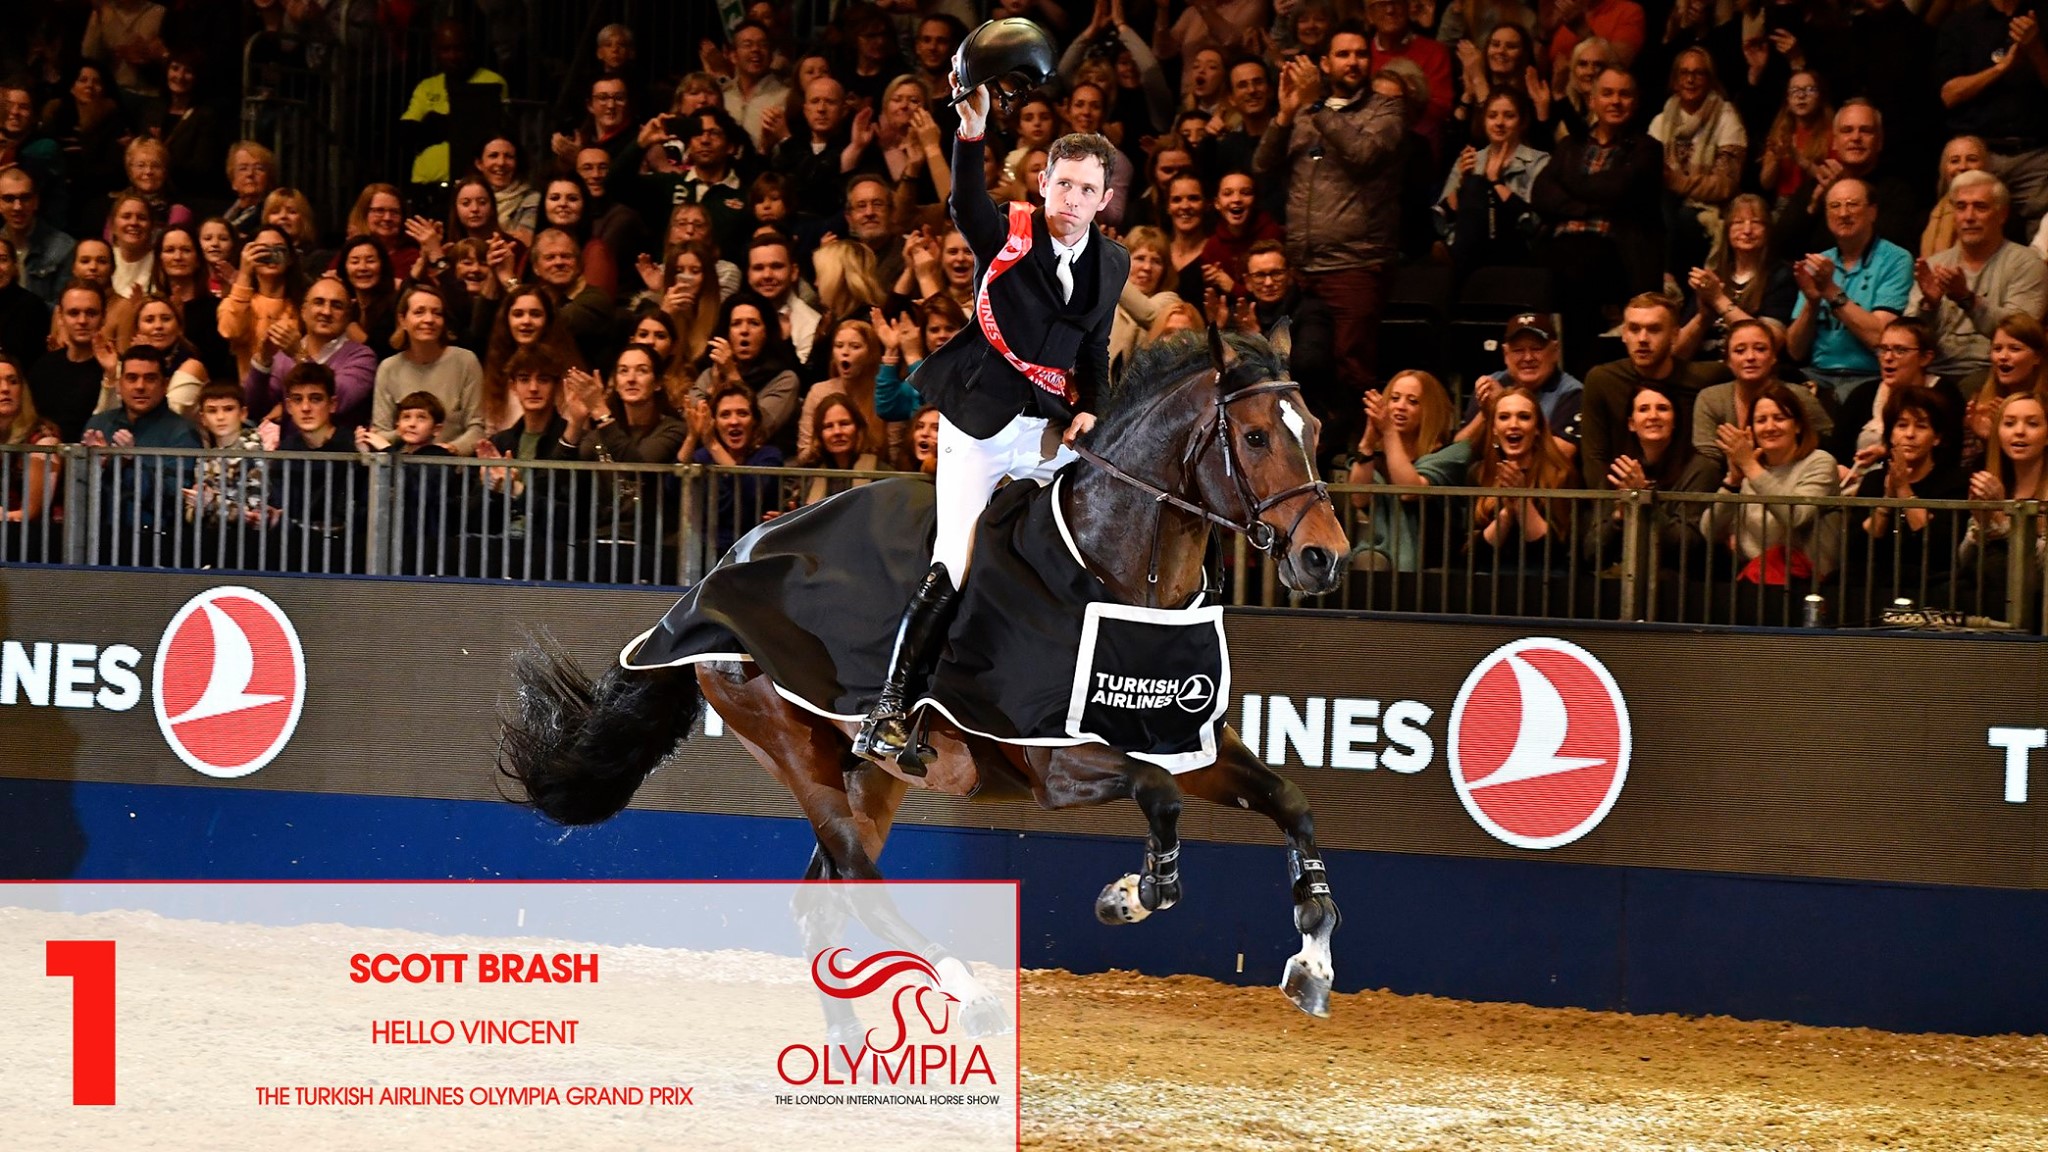 A Night to Remember for RED MILLS Riders Scott Brash & Edwina Tops Alexander at Olympia